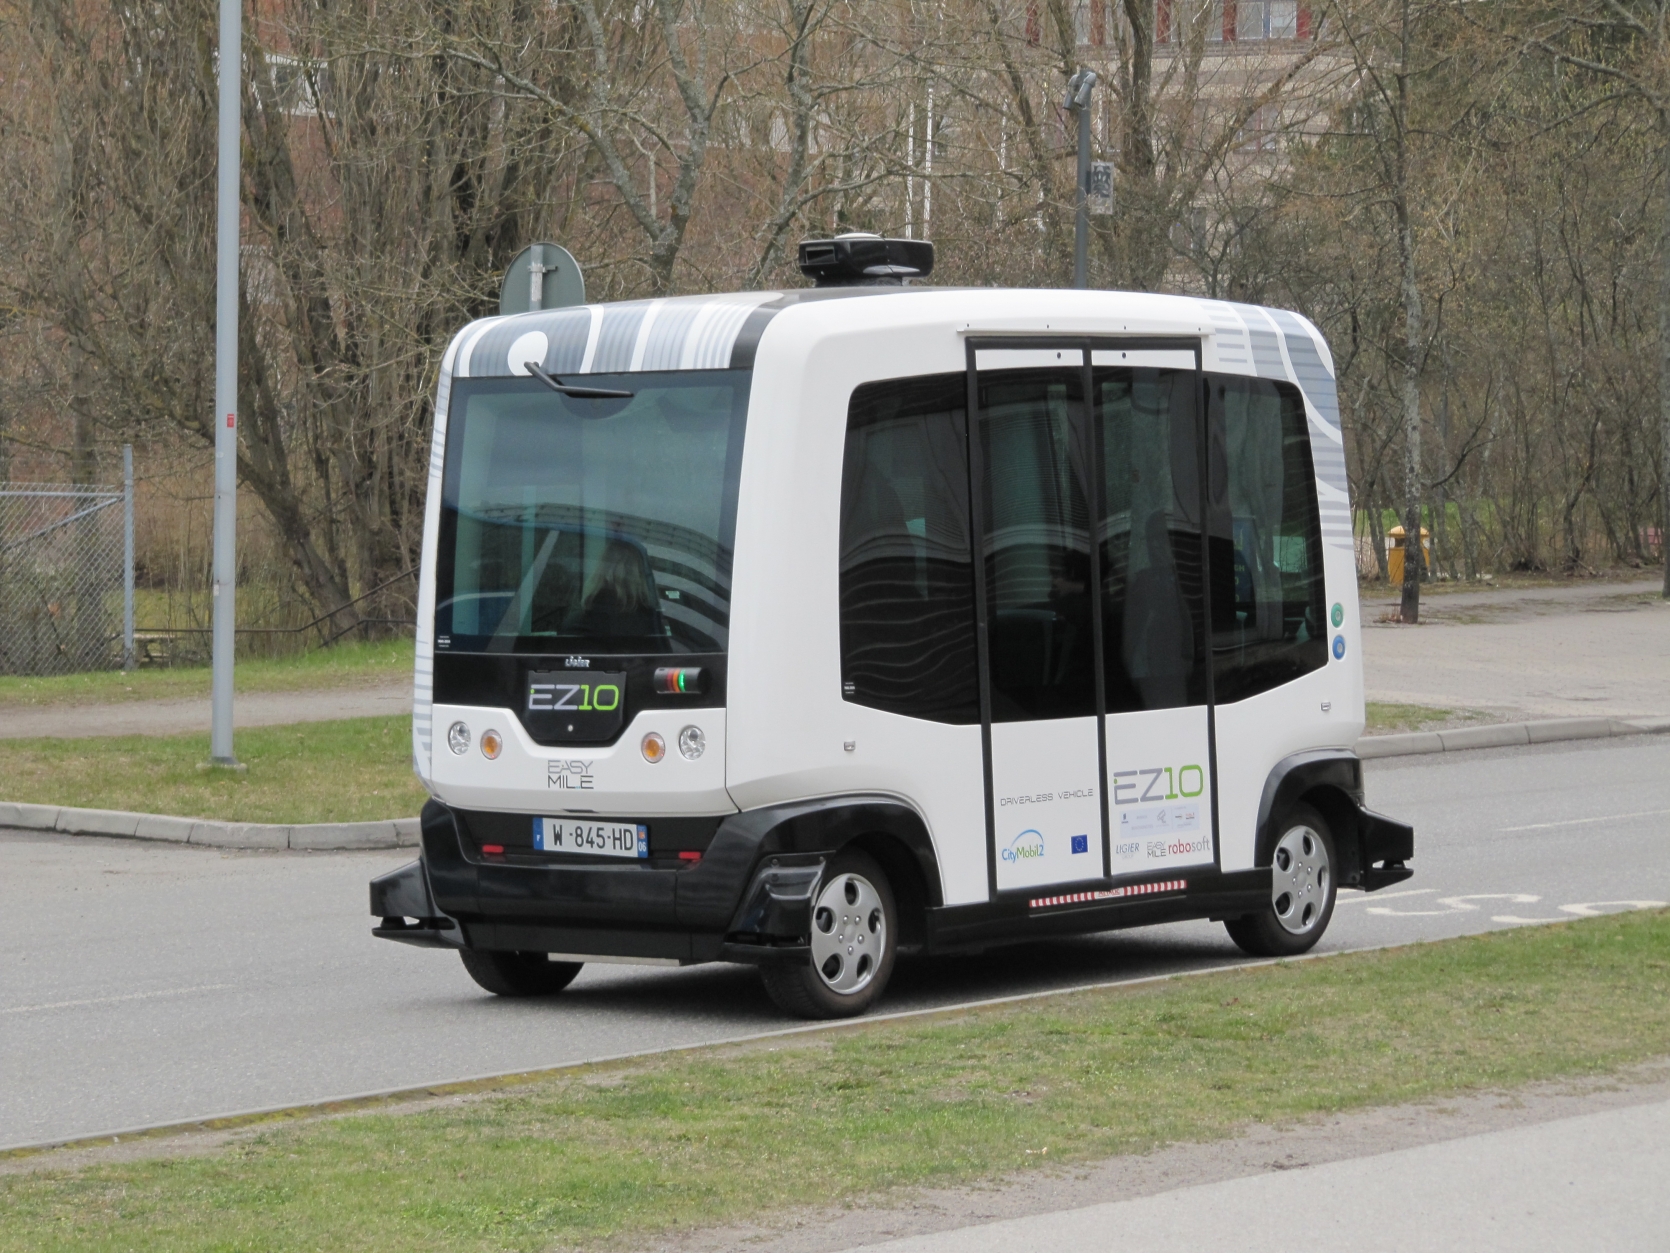 A MOVE FOR DRIVERLESS MASS TRANSIT HITS SPEED BUMPS